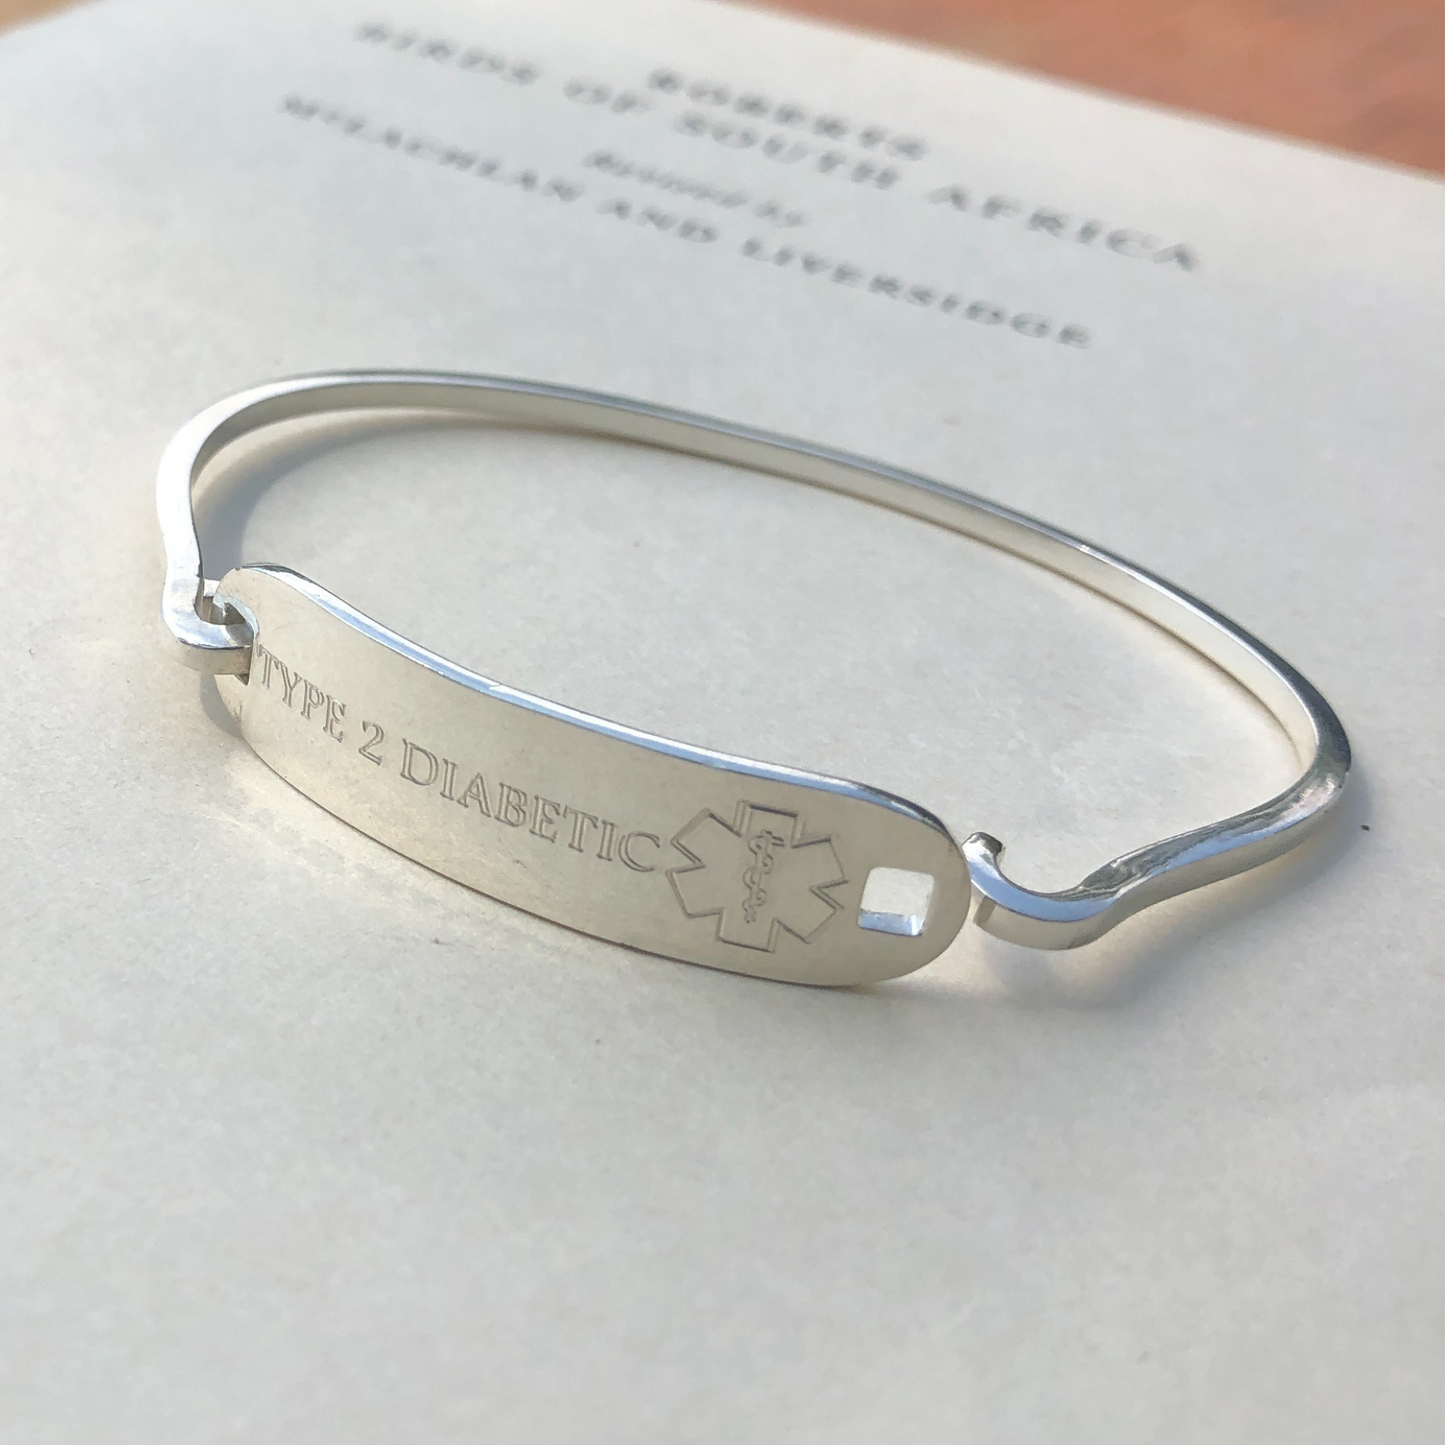 Silver engraved medical alert bangle made in Africa by the Zuri Collection